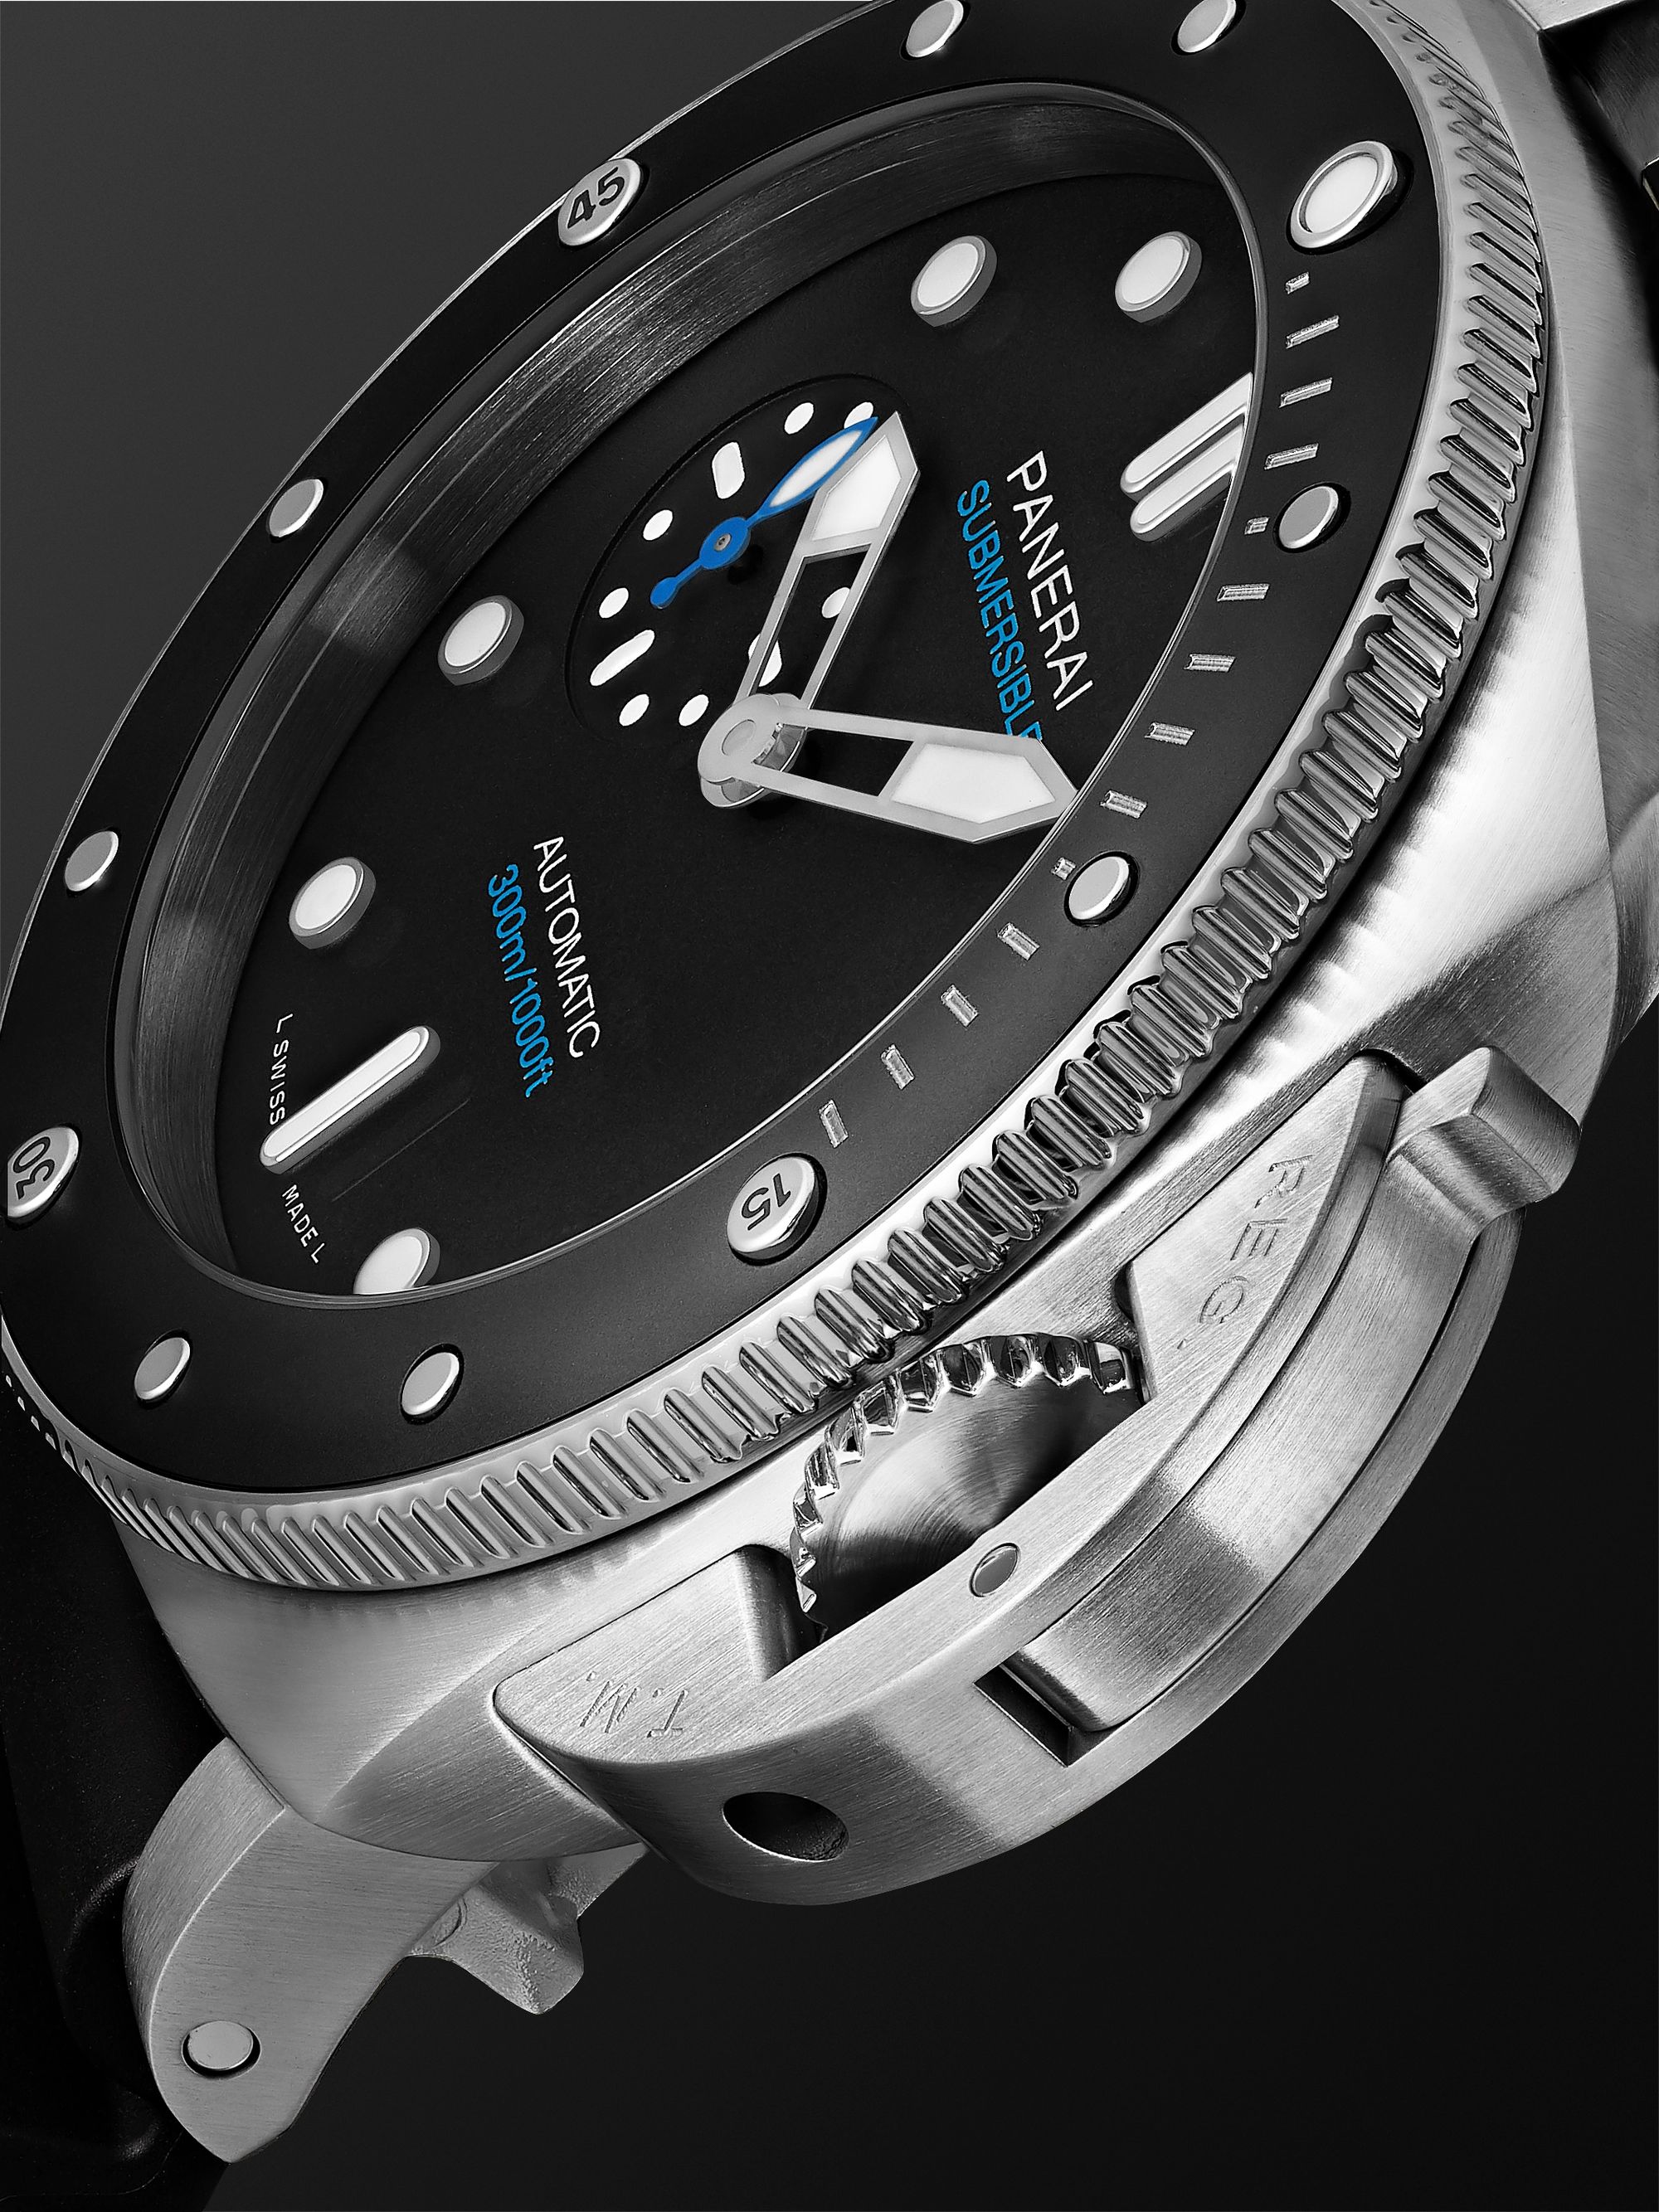 PANERAI Submersible Automatic 42mm Stainless Steel, Ceramic and Rubber Watch, Ref. No. PAM 00683